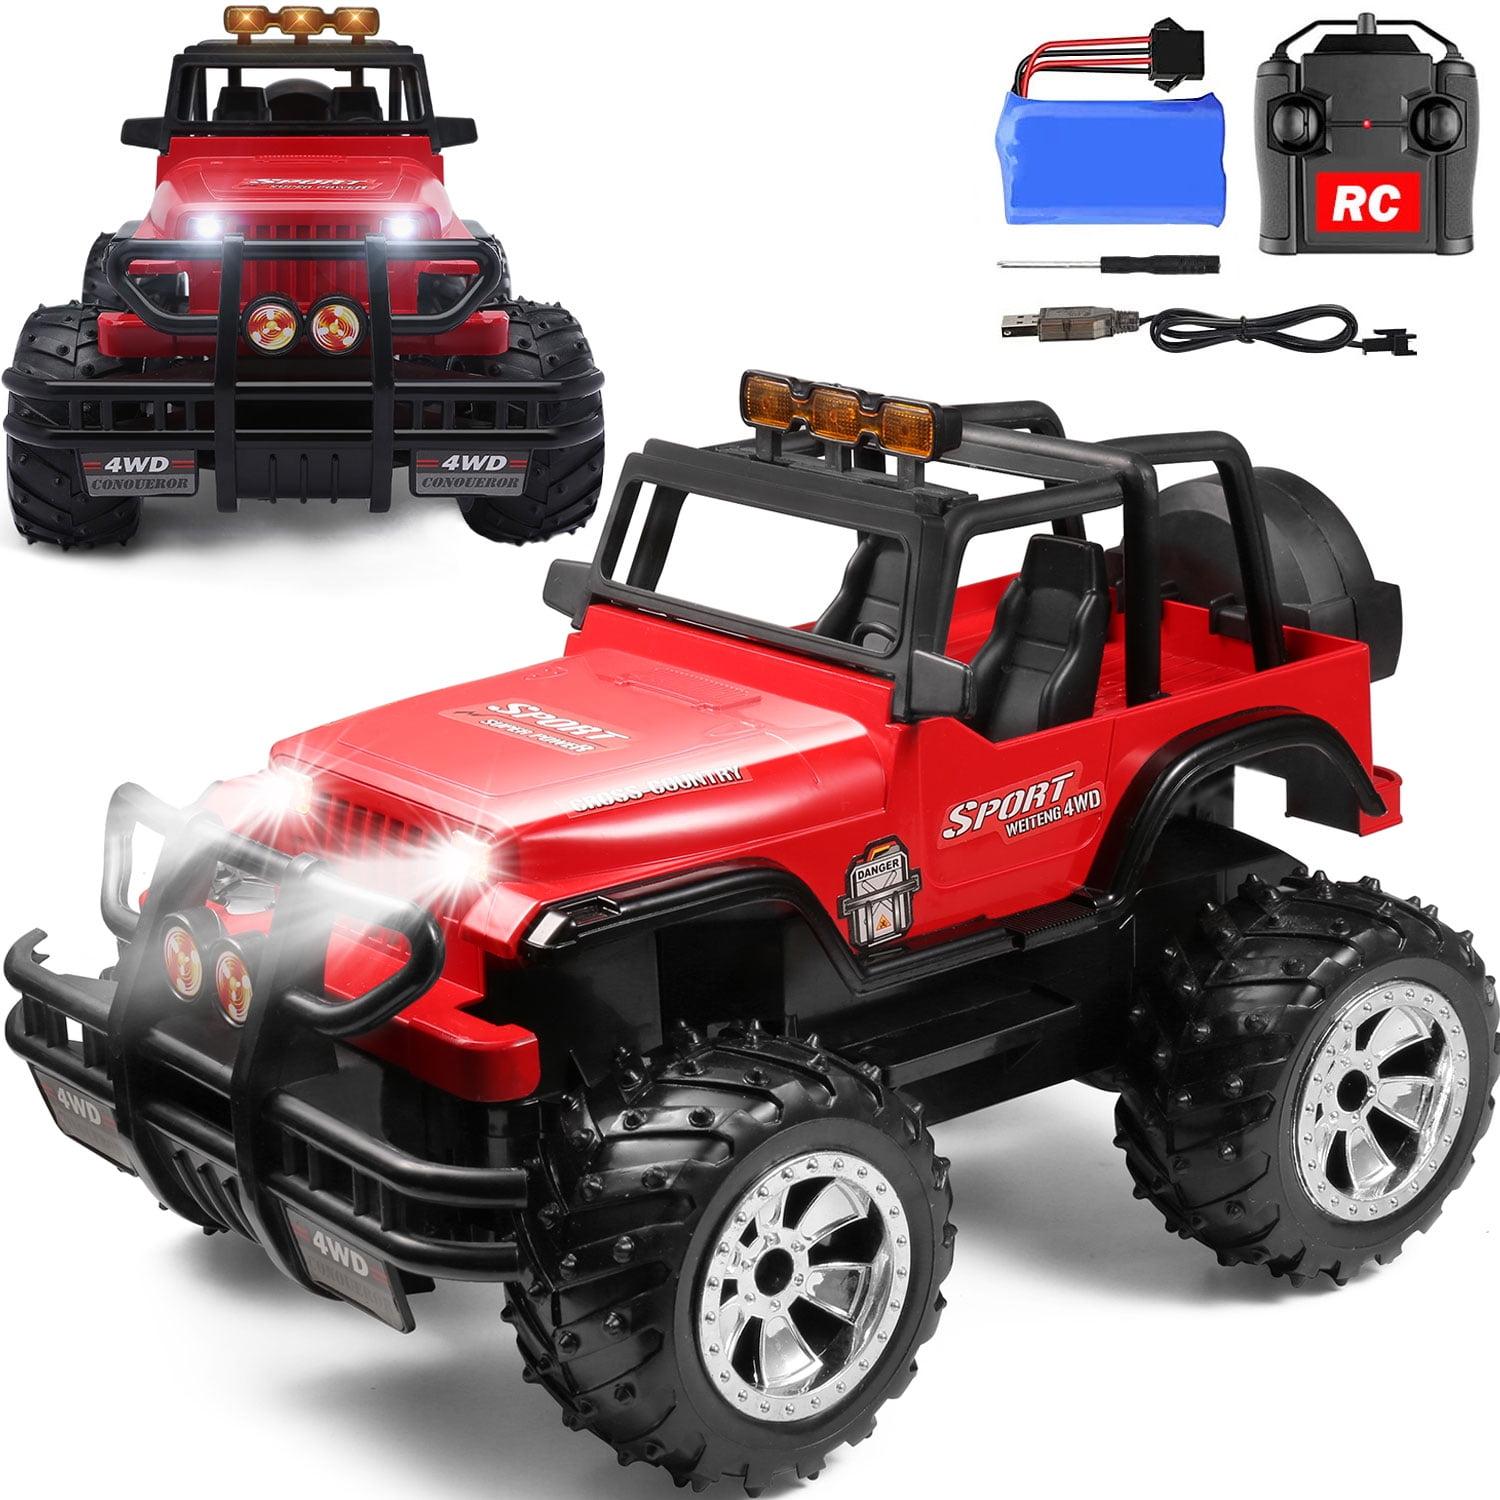 Remote Control Jeep 4X4: Realistic designs and durable materials make this 4x4 the ultimate remote control jeep.